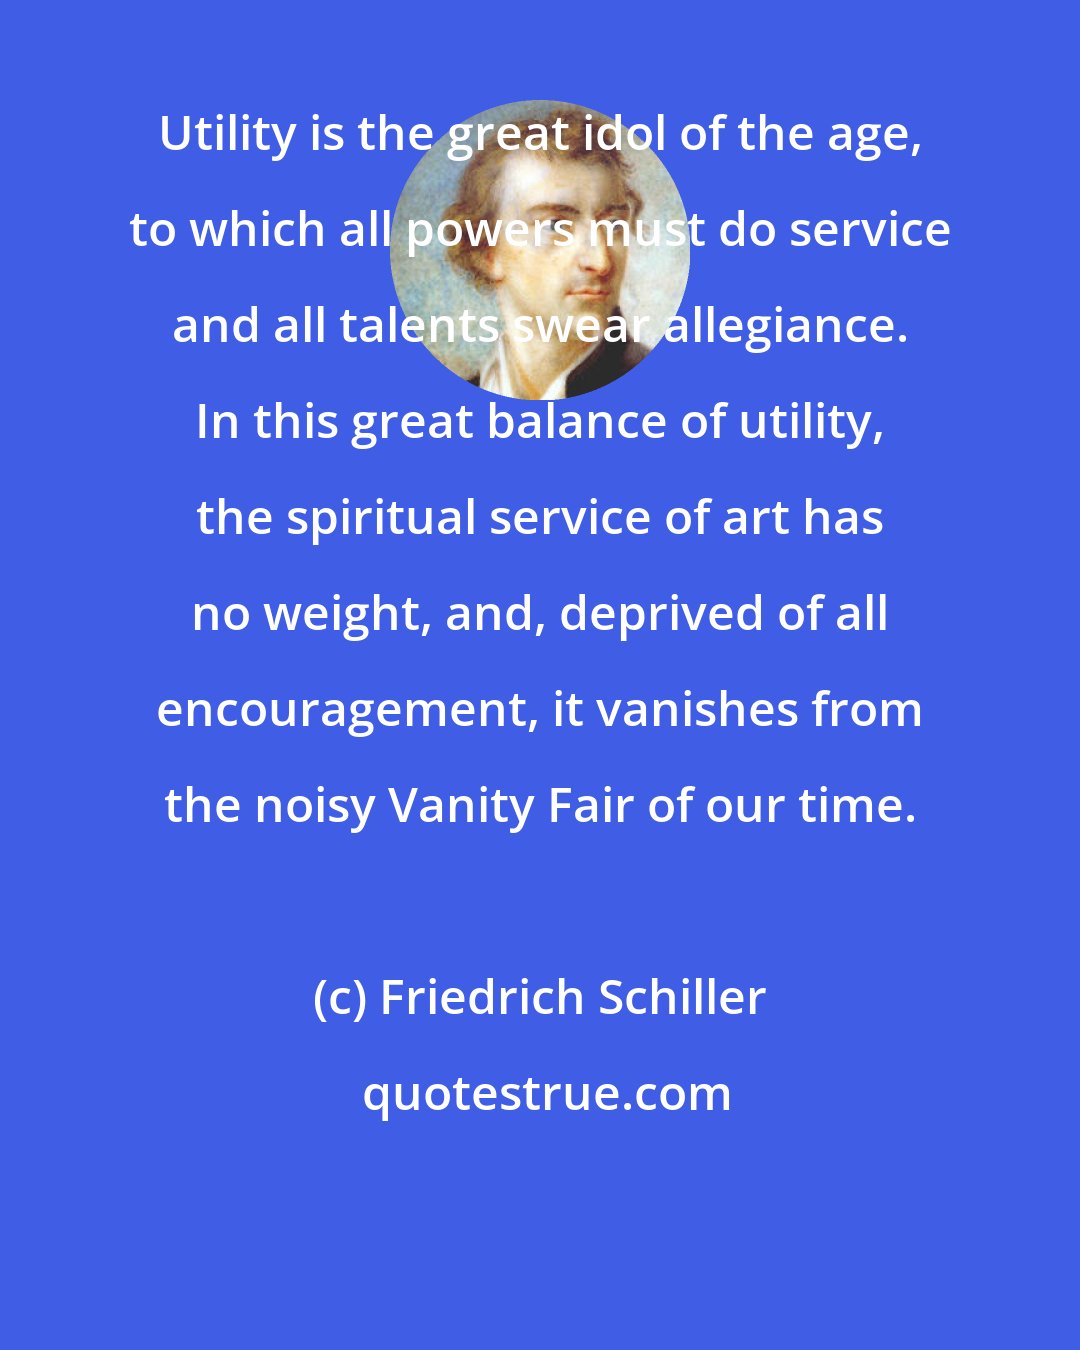 Friedrich Schiller: Utility is the great idol of the age, to which all powers must do service and all talents swear allegiance. In this great balance of utility, the spiritual service of art has no weight, and, deprived of all encouragement, it vanishes from the noisy Vanity Fair of our time.